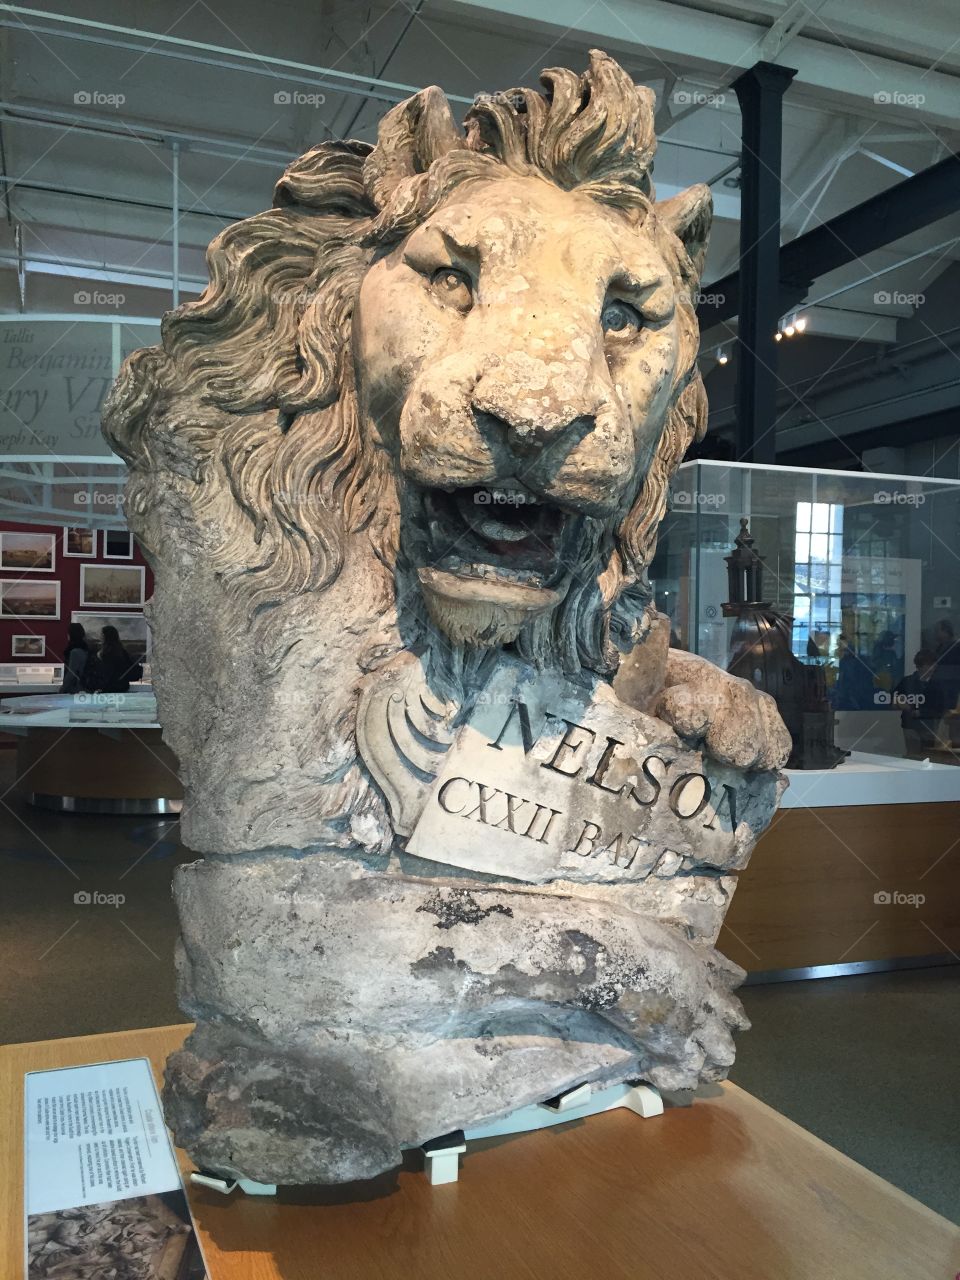 
Stone Lion in a museum of England